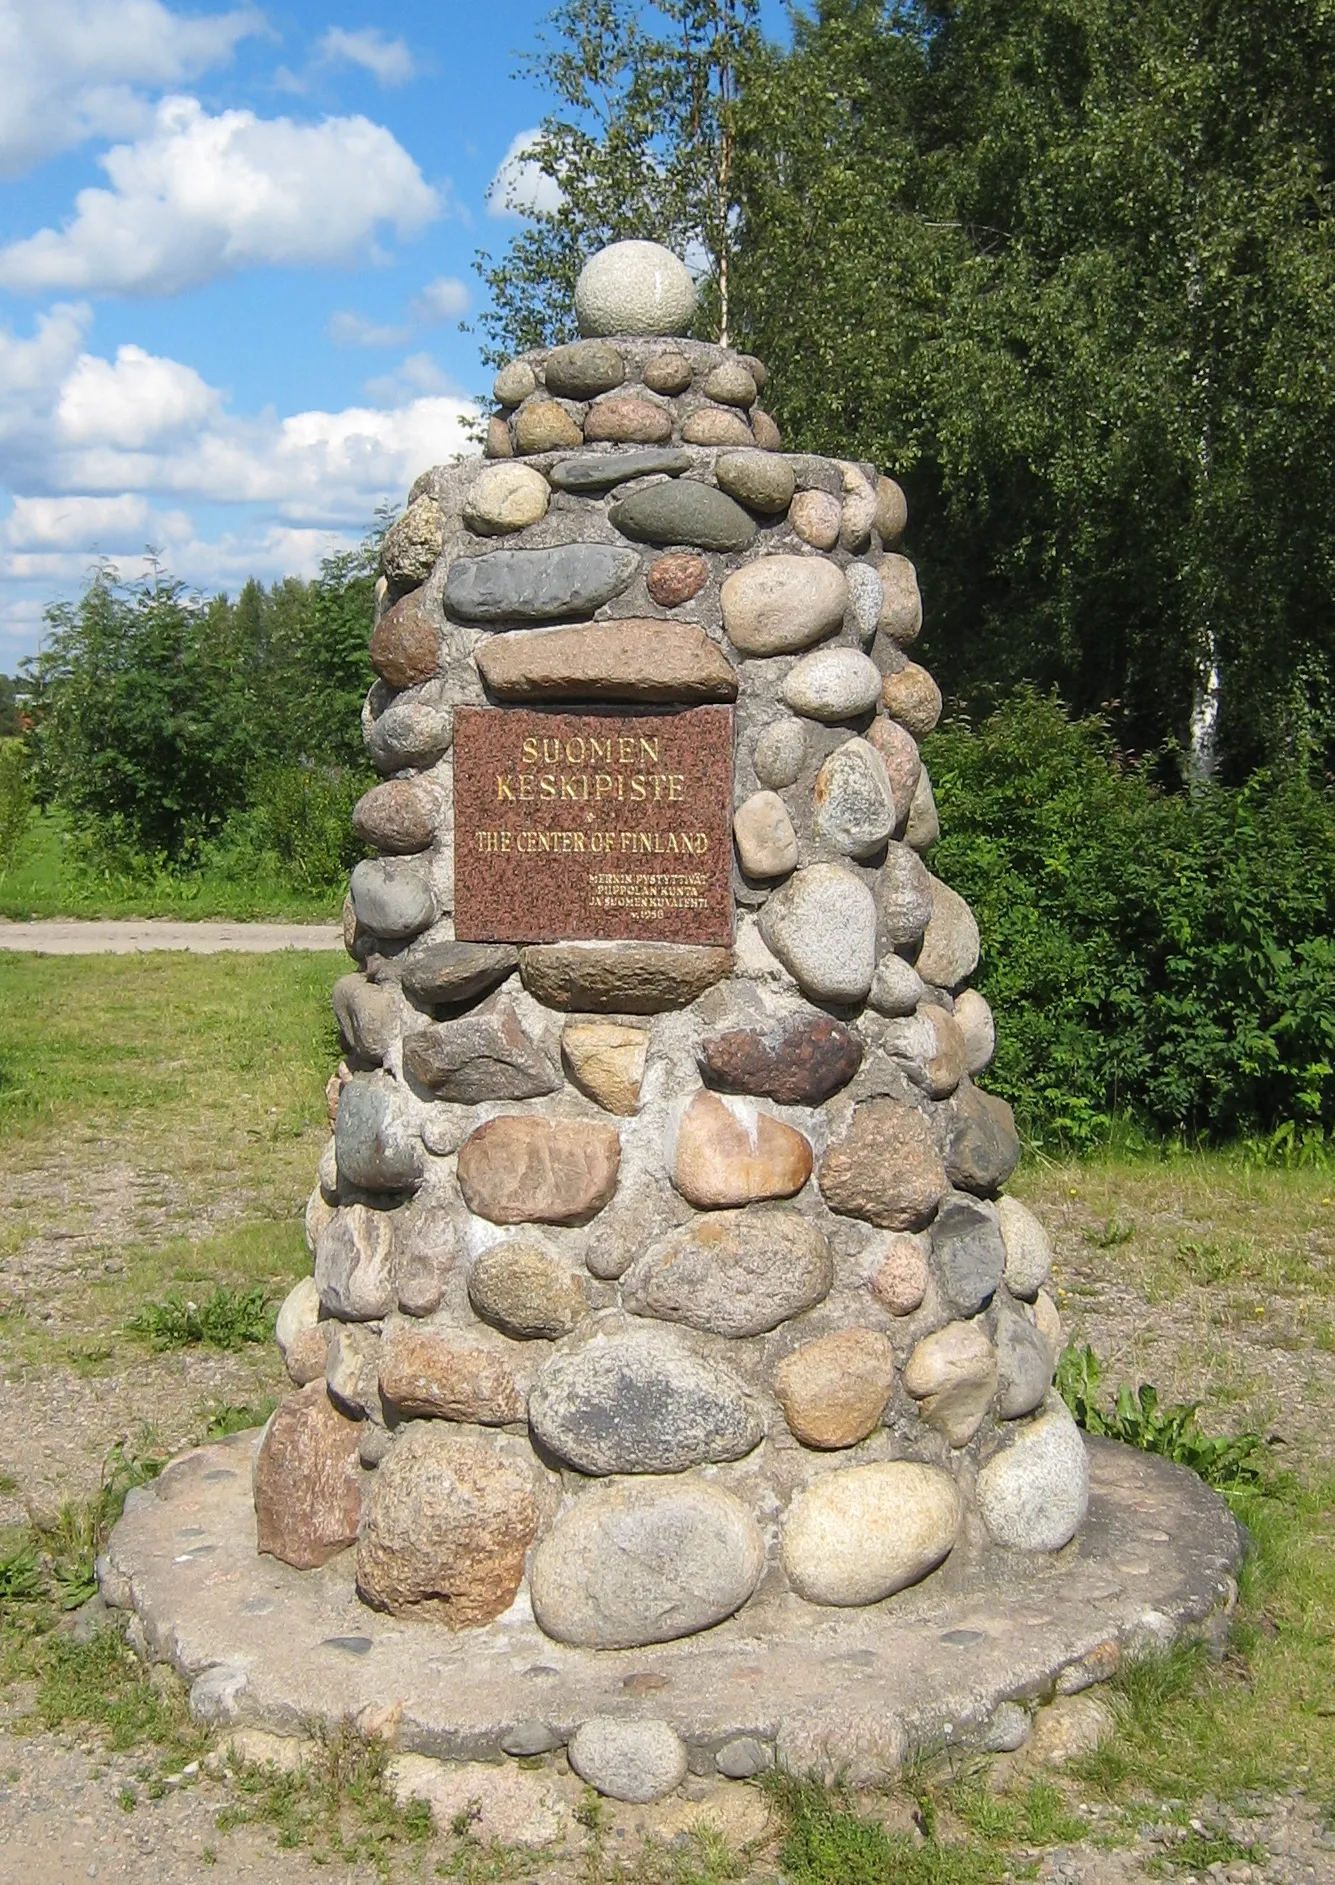 Photo showing: Monument in Piippola, Finland, marking "The Center of Finland", erected in 1958.